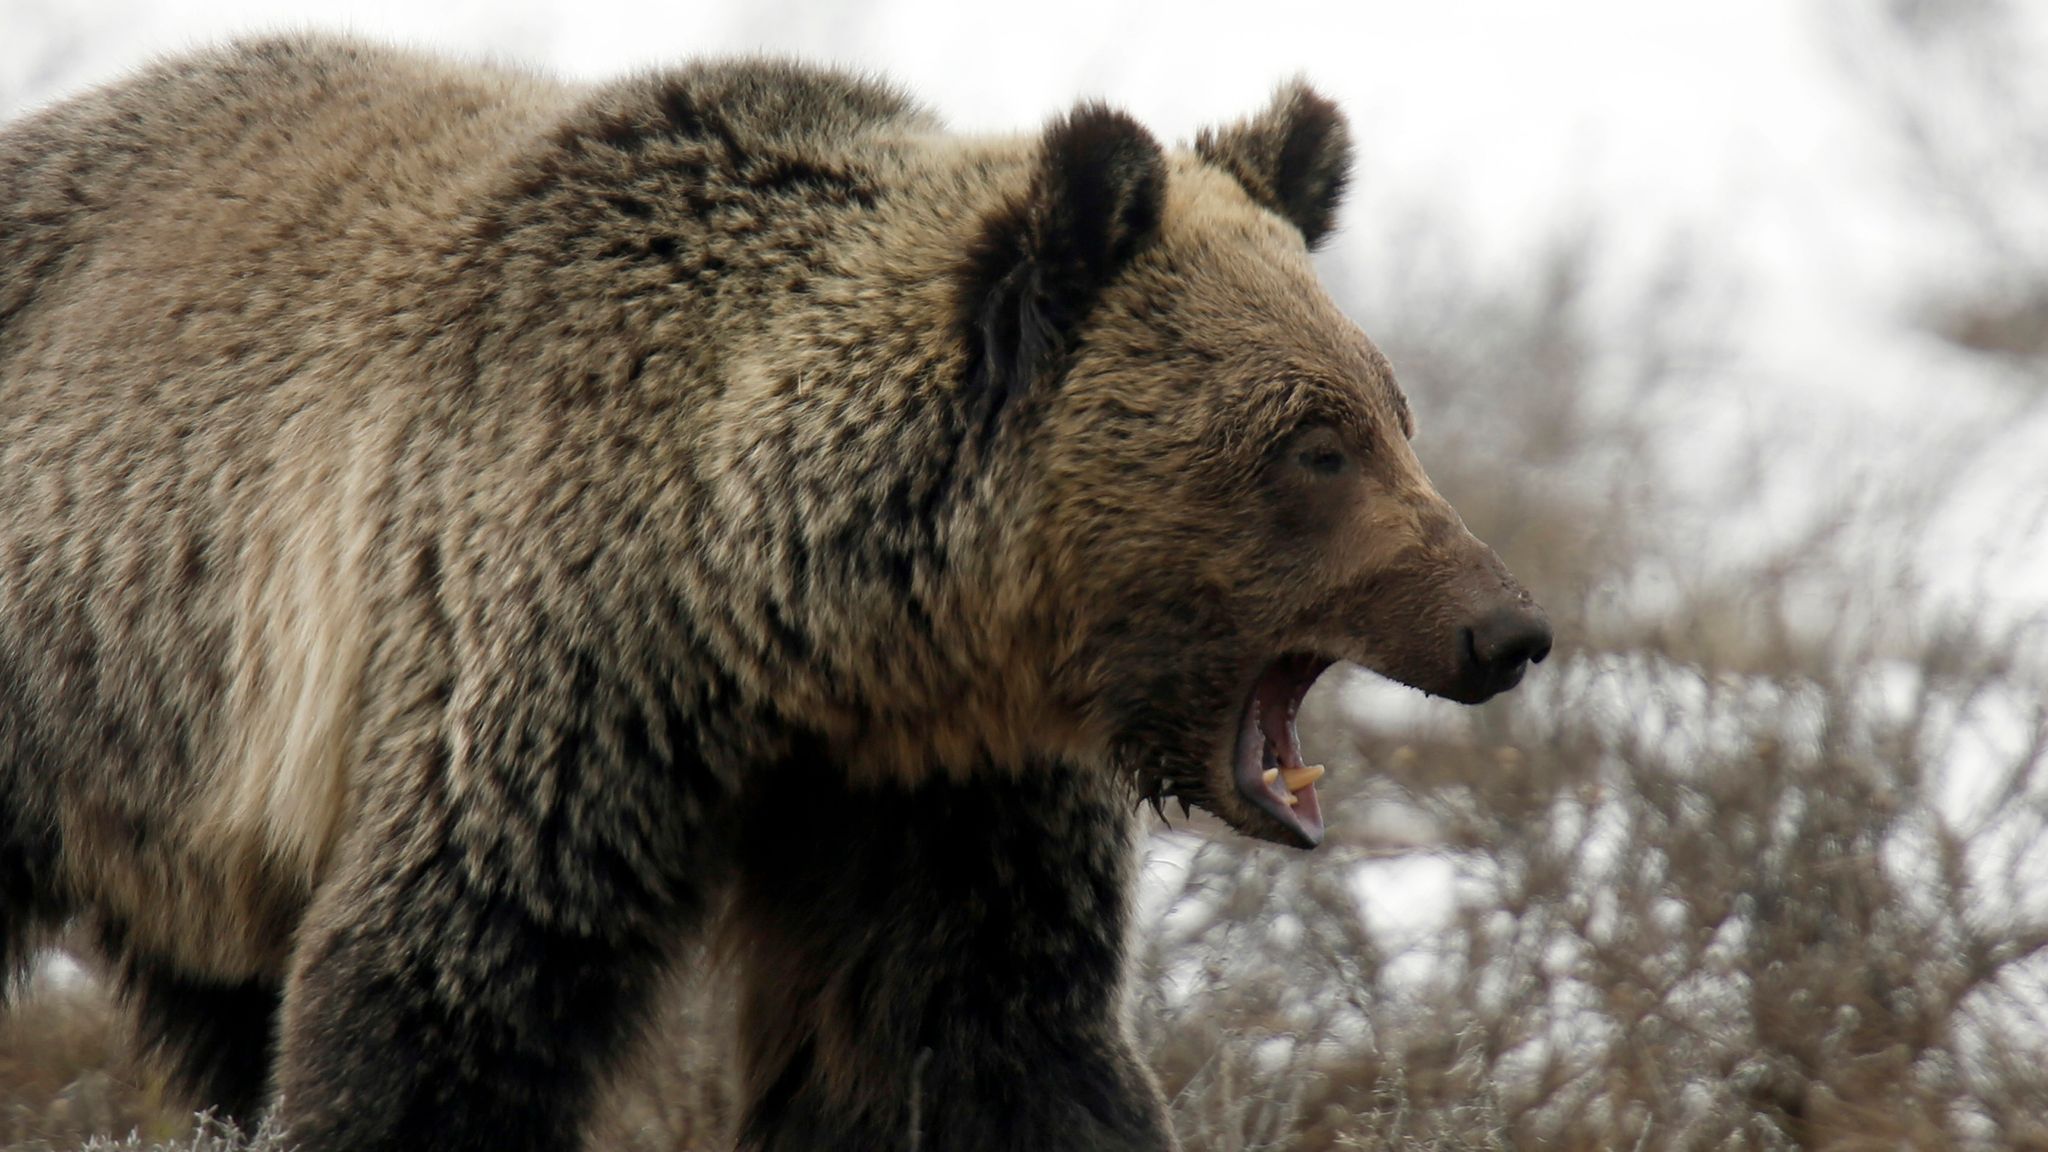 Woman found dead after suspected grizzly bear attack in Montana